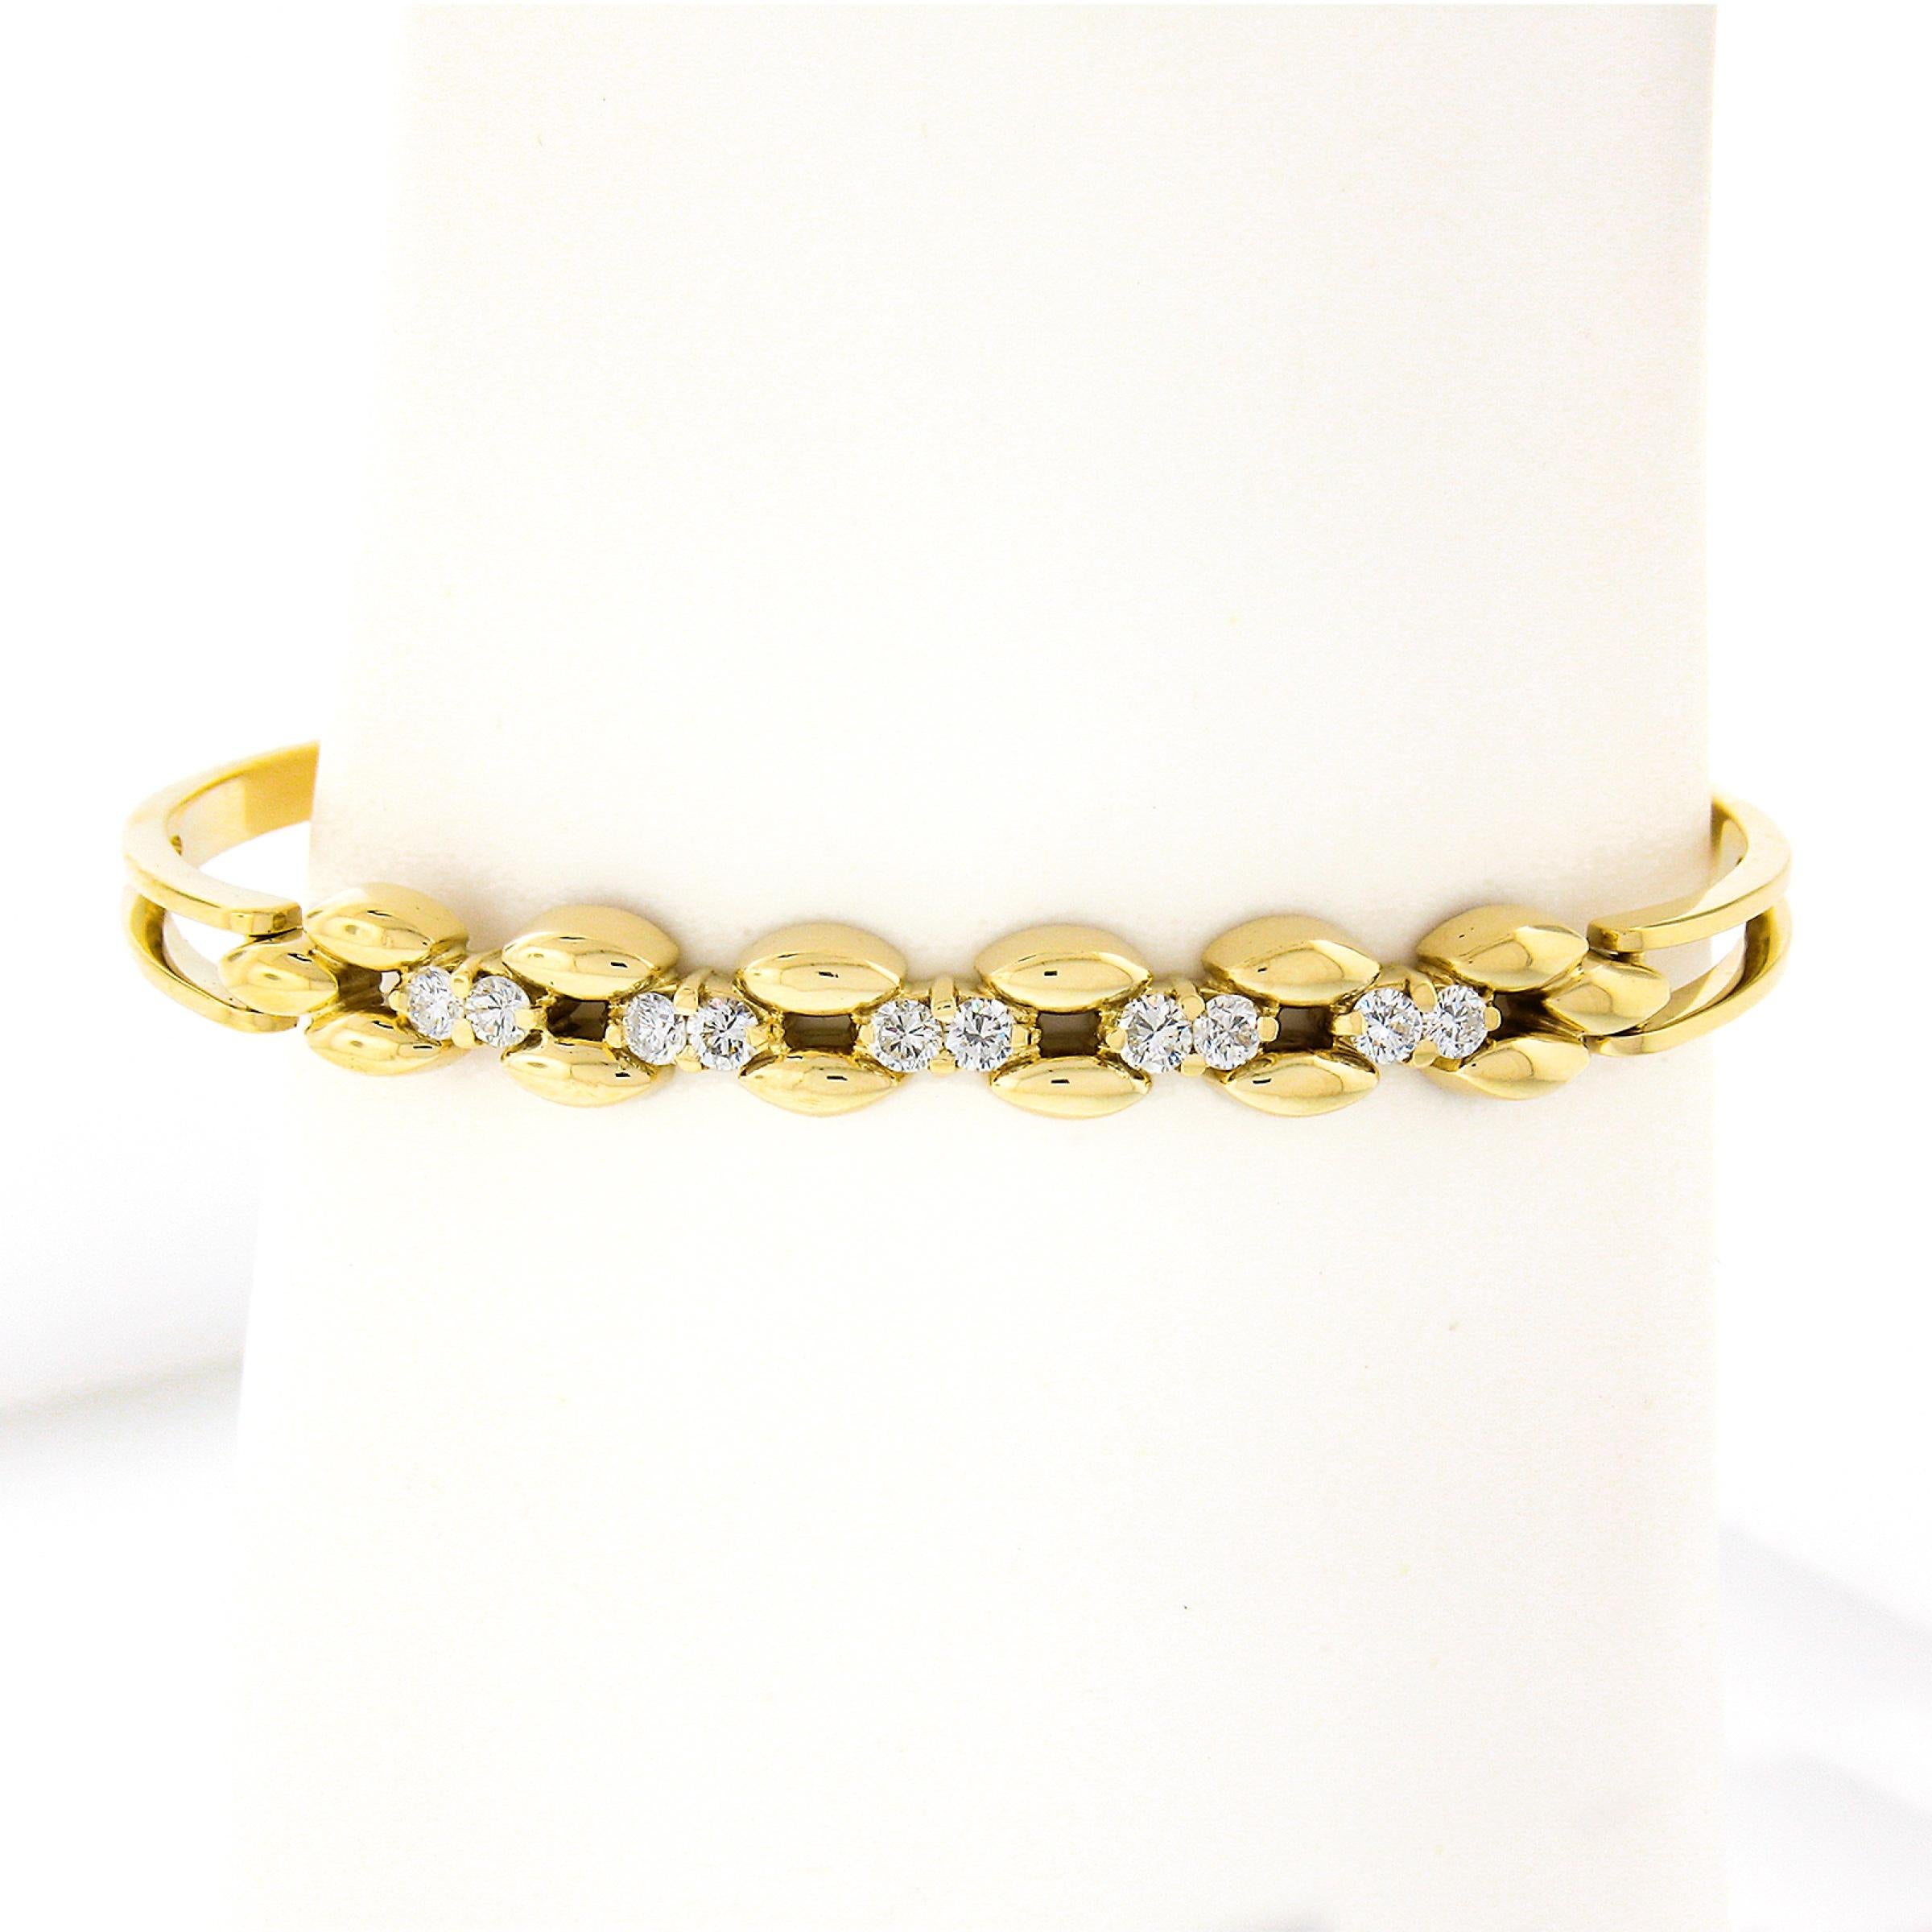 Here we have a gorgeous and well made bangle bracelet that is crafted from solid 14k yellow gold. It features approximately 0.60 carats of fine quality diamonds neatly prong set in sets of two across the elegant open design at the top. The round